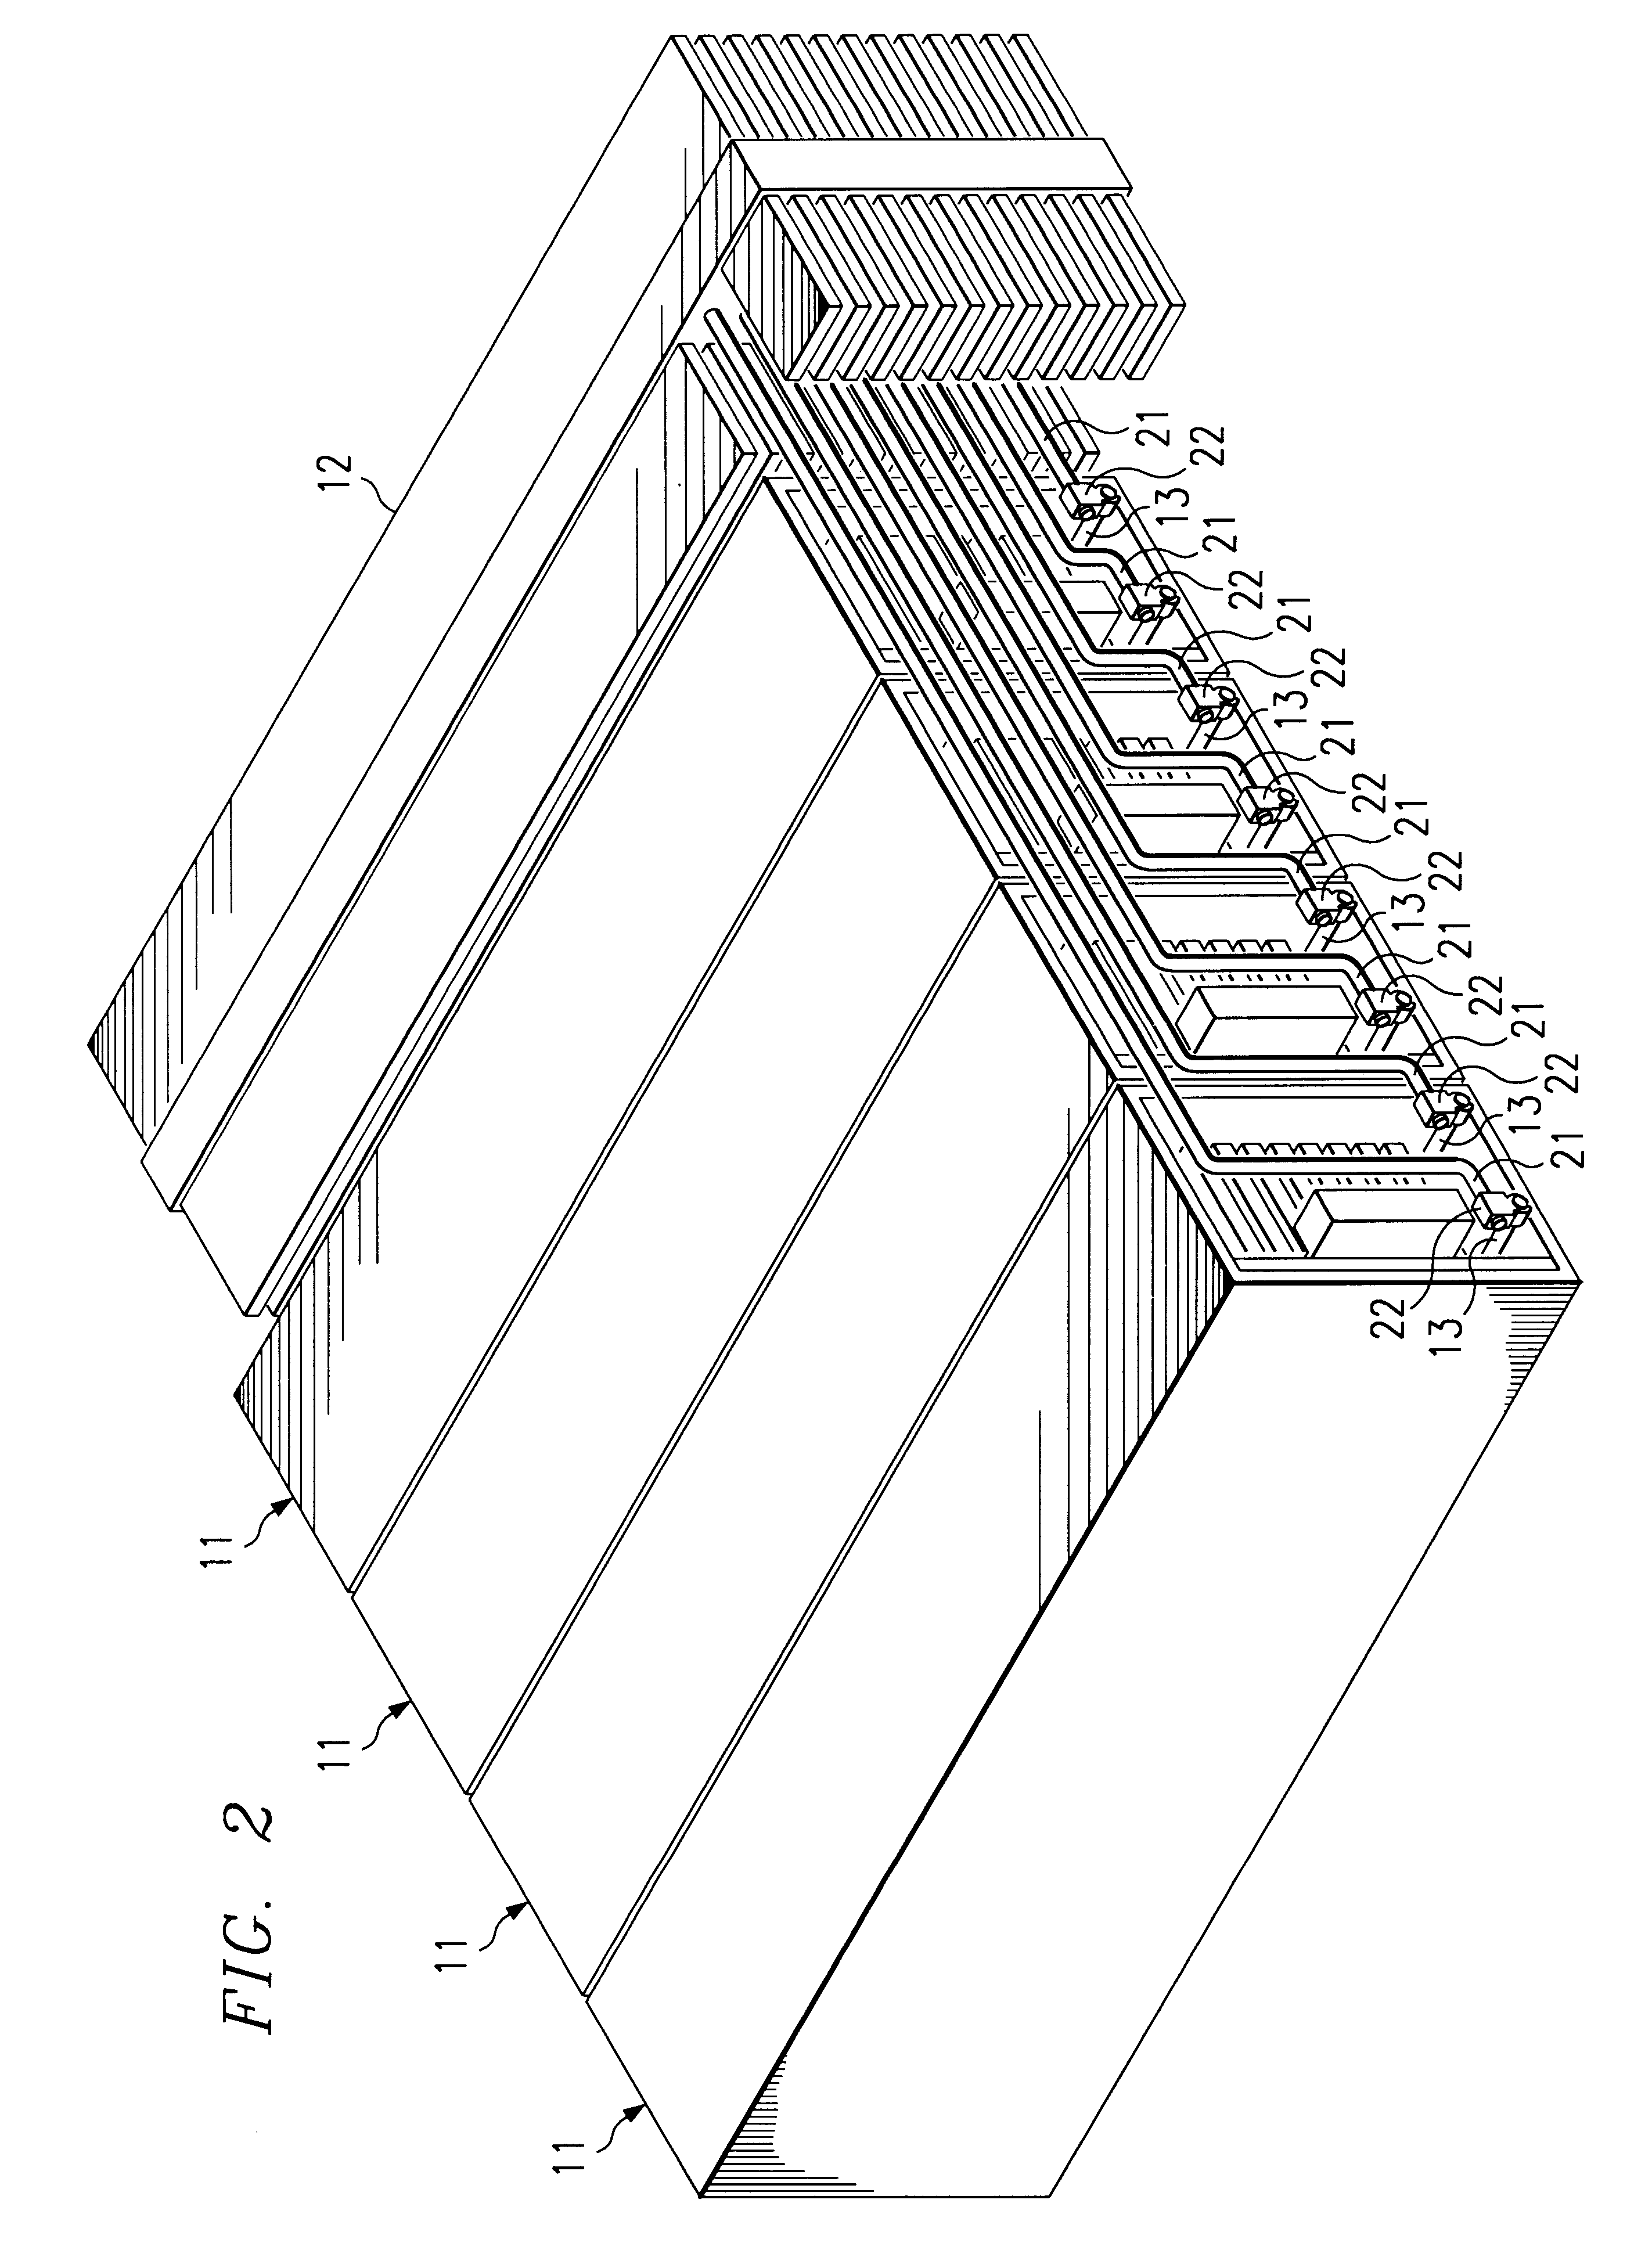 Thermal connection system for modular computer system components